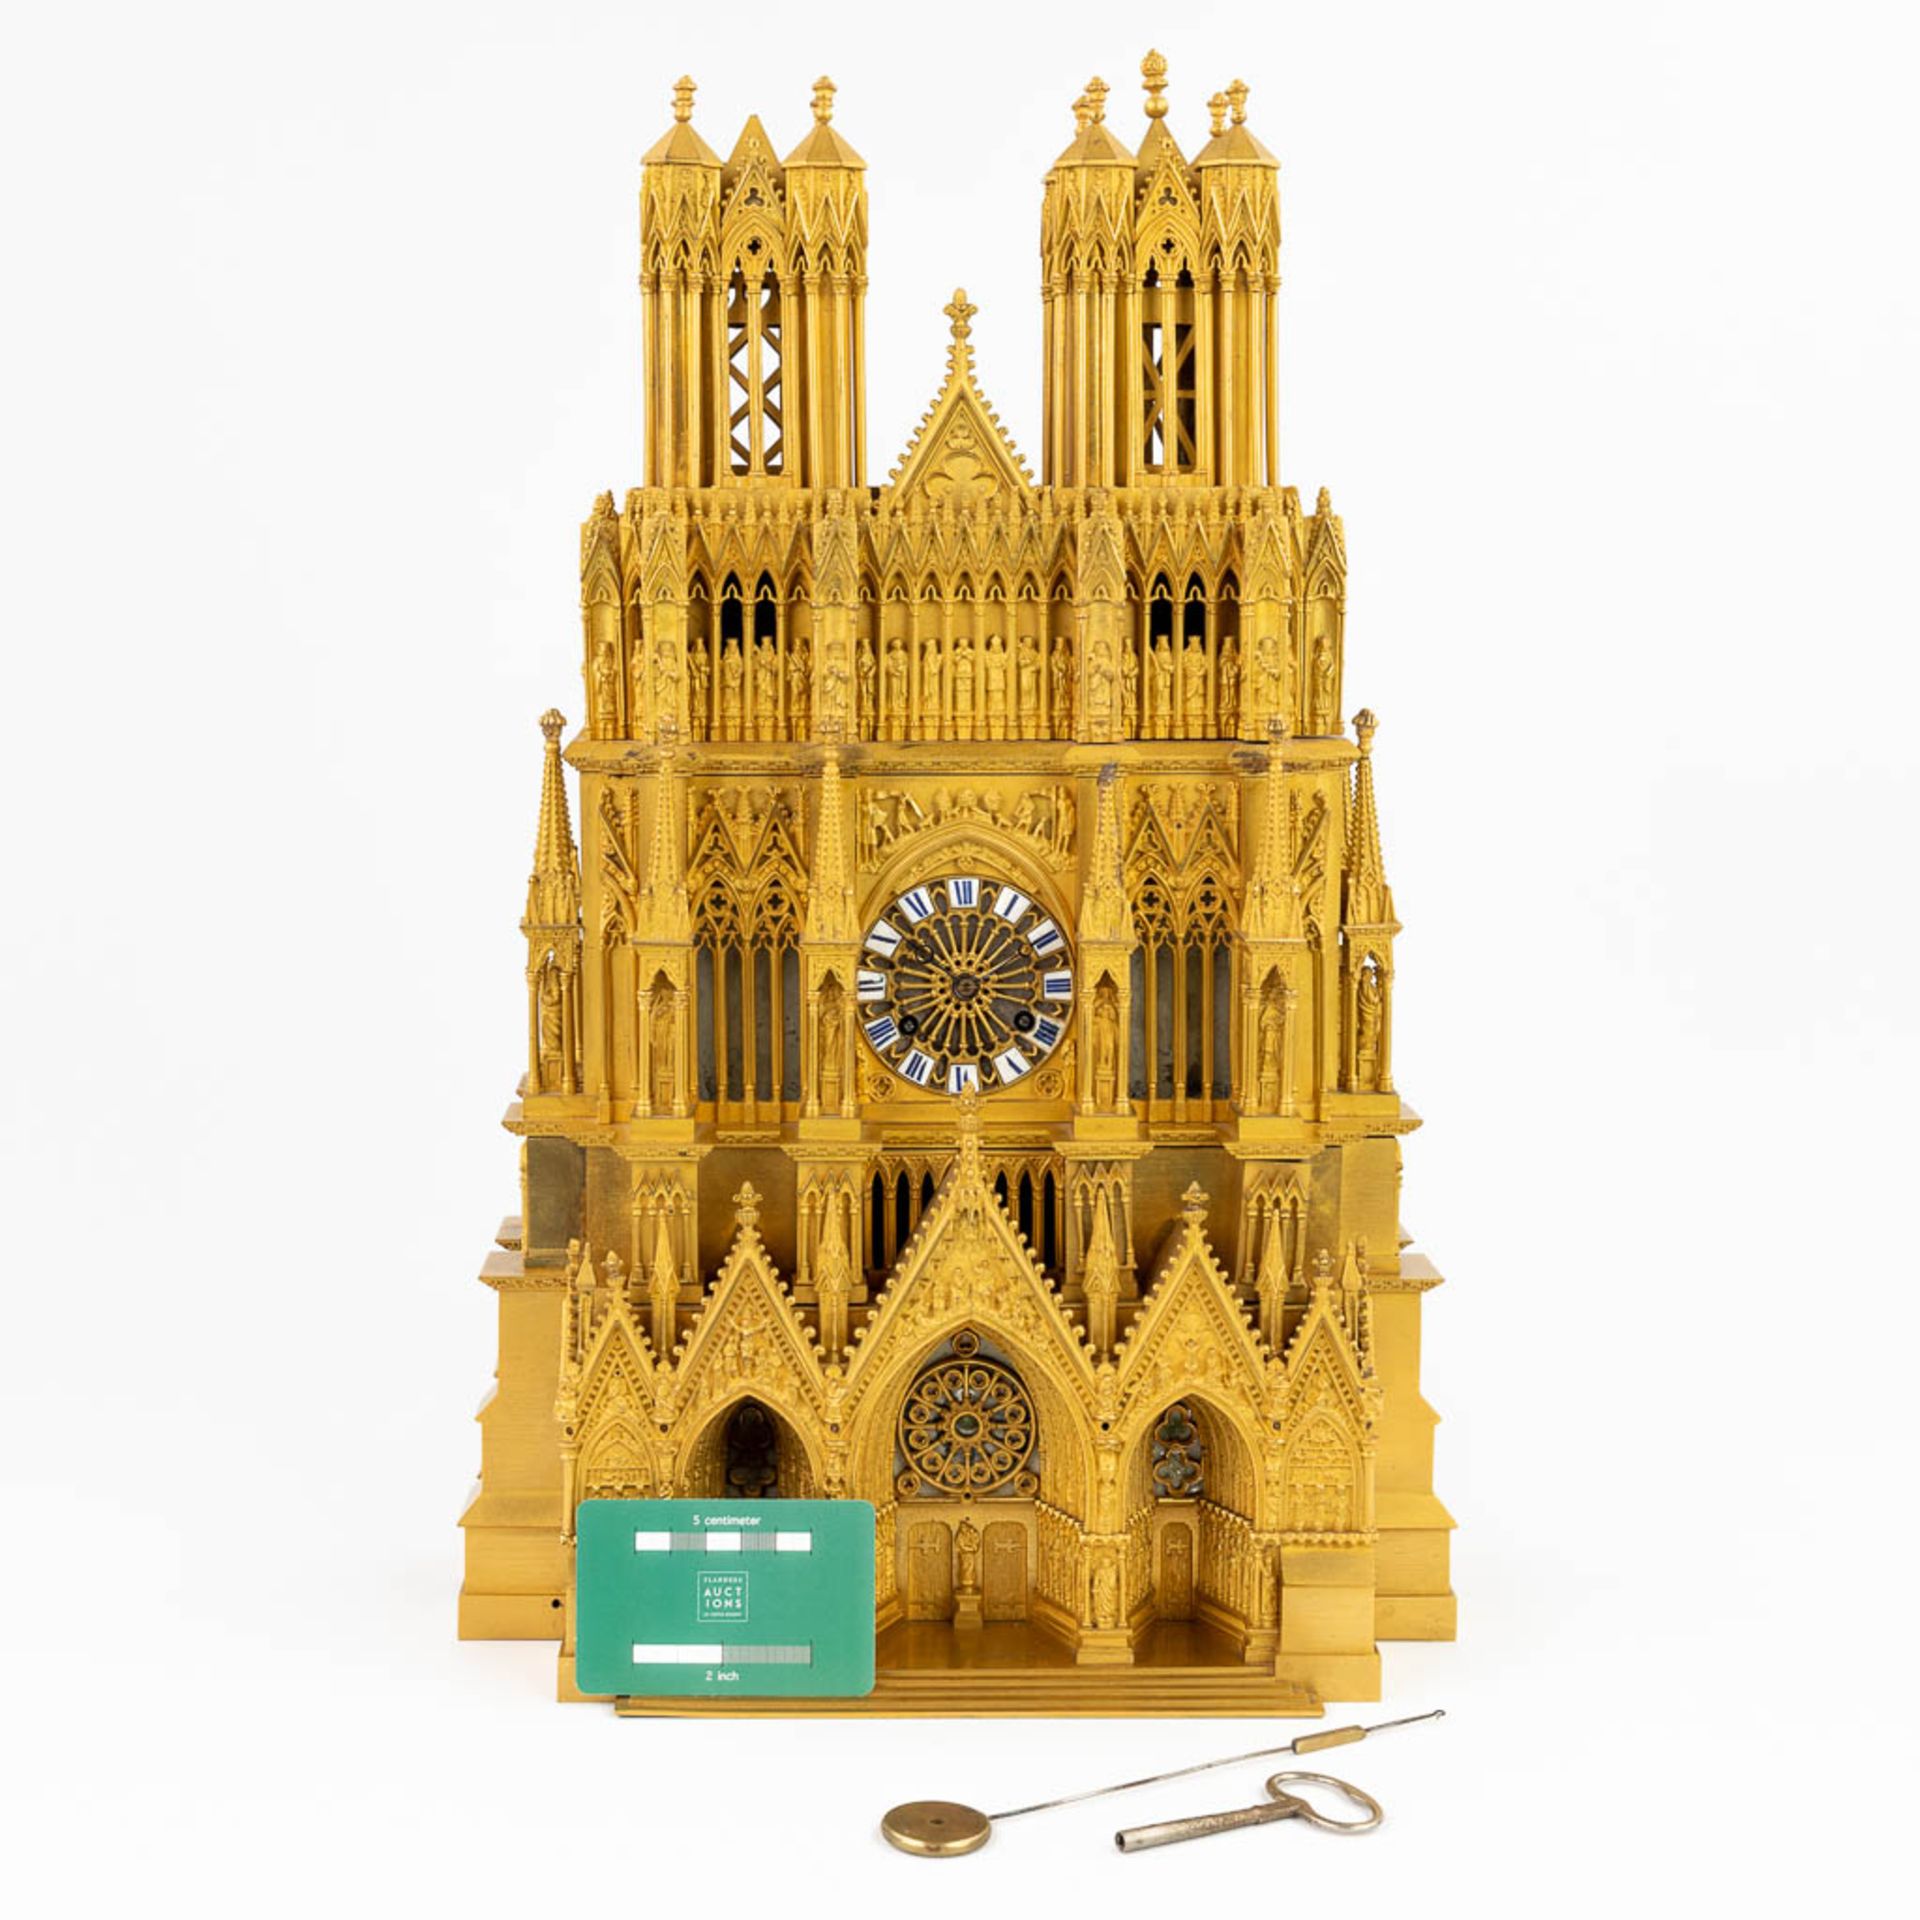 Cathedrale de Reims, an exceptional mantle clock made of gilt bronze. (15 x 31 x 47cm) - Image 7 of 16